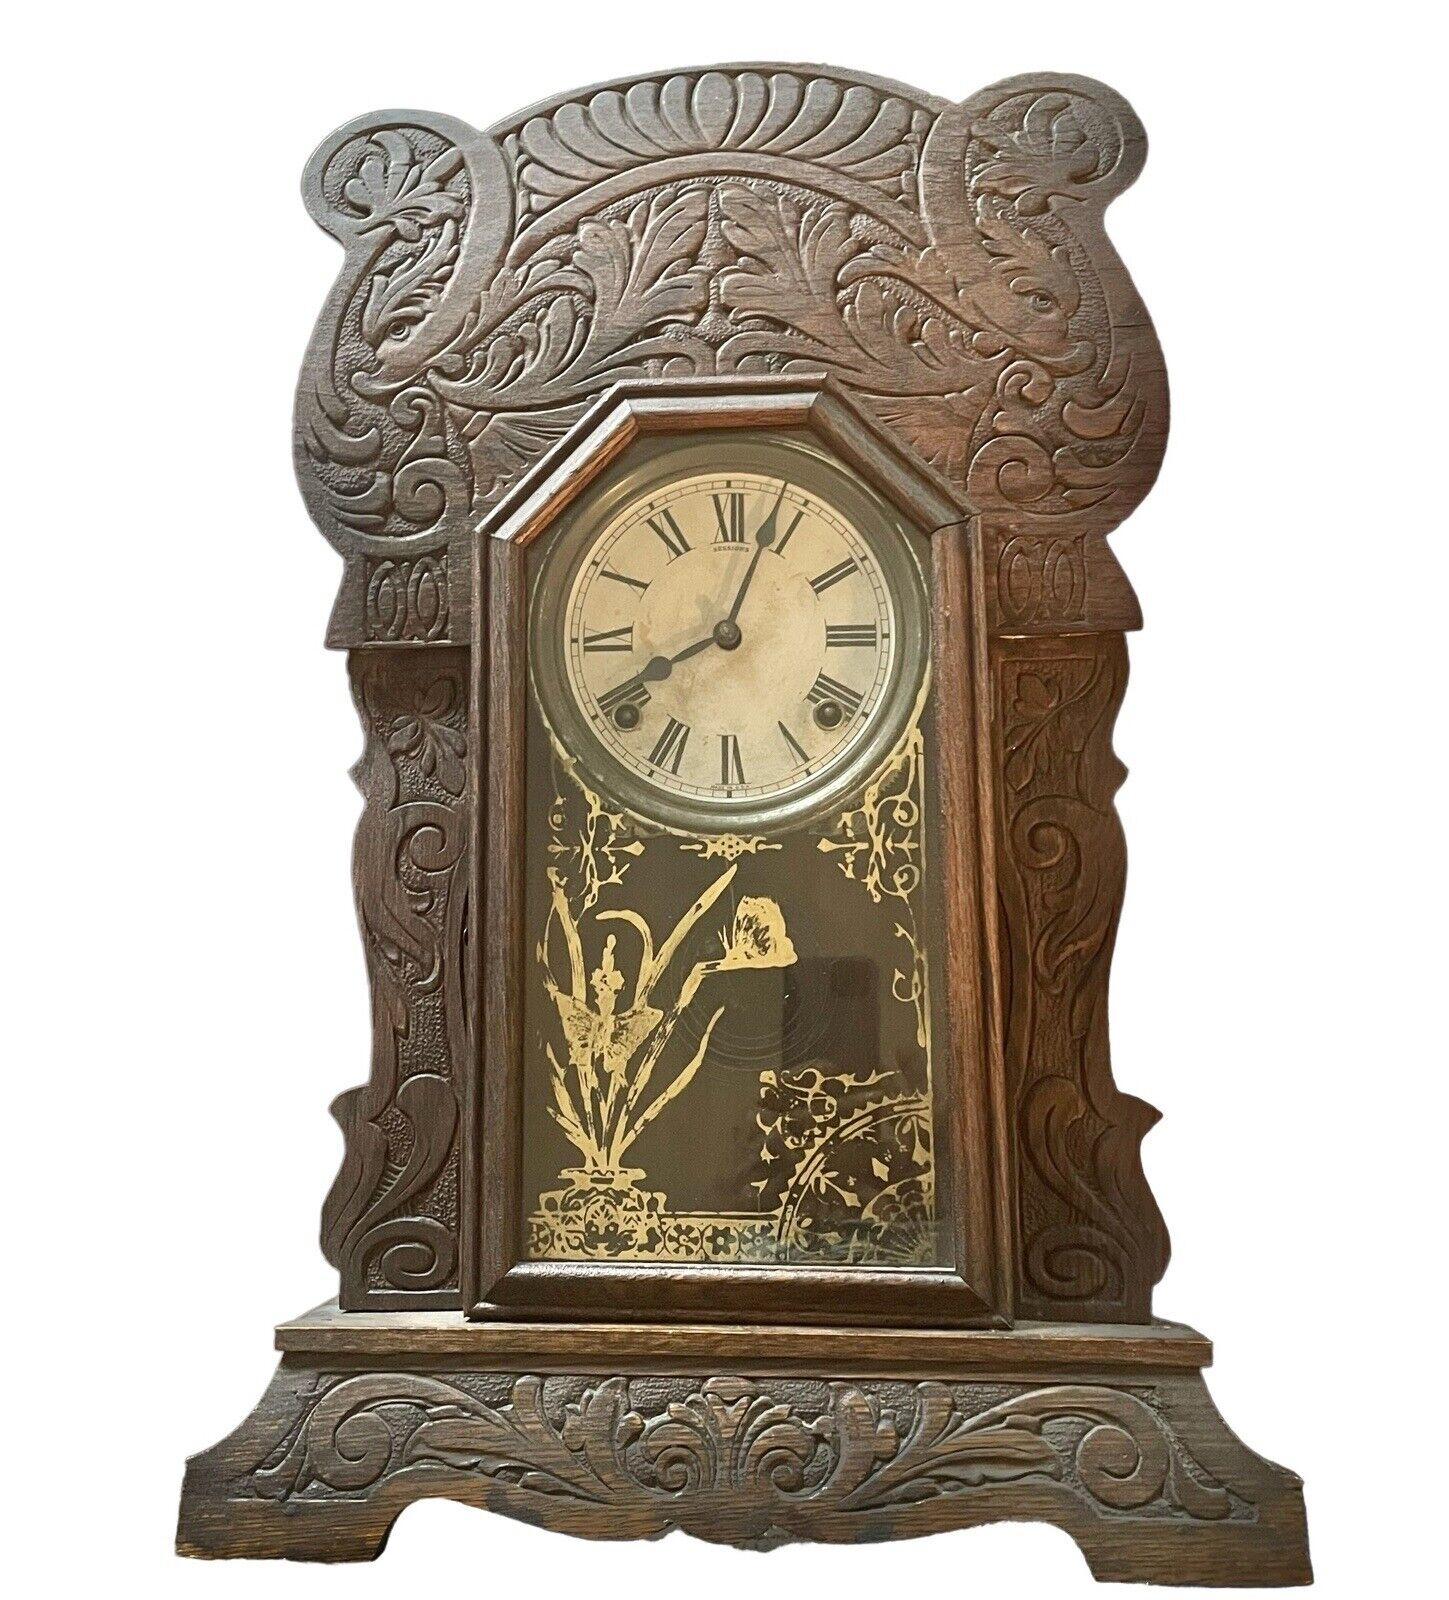 Antique USA Sessions Gingerbread Clock, Time Works, Chimes Don’t